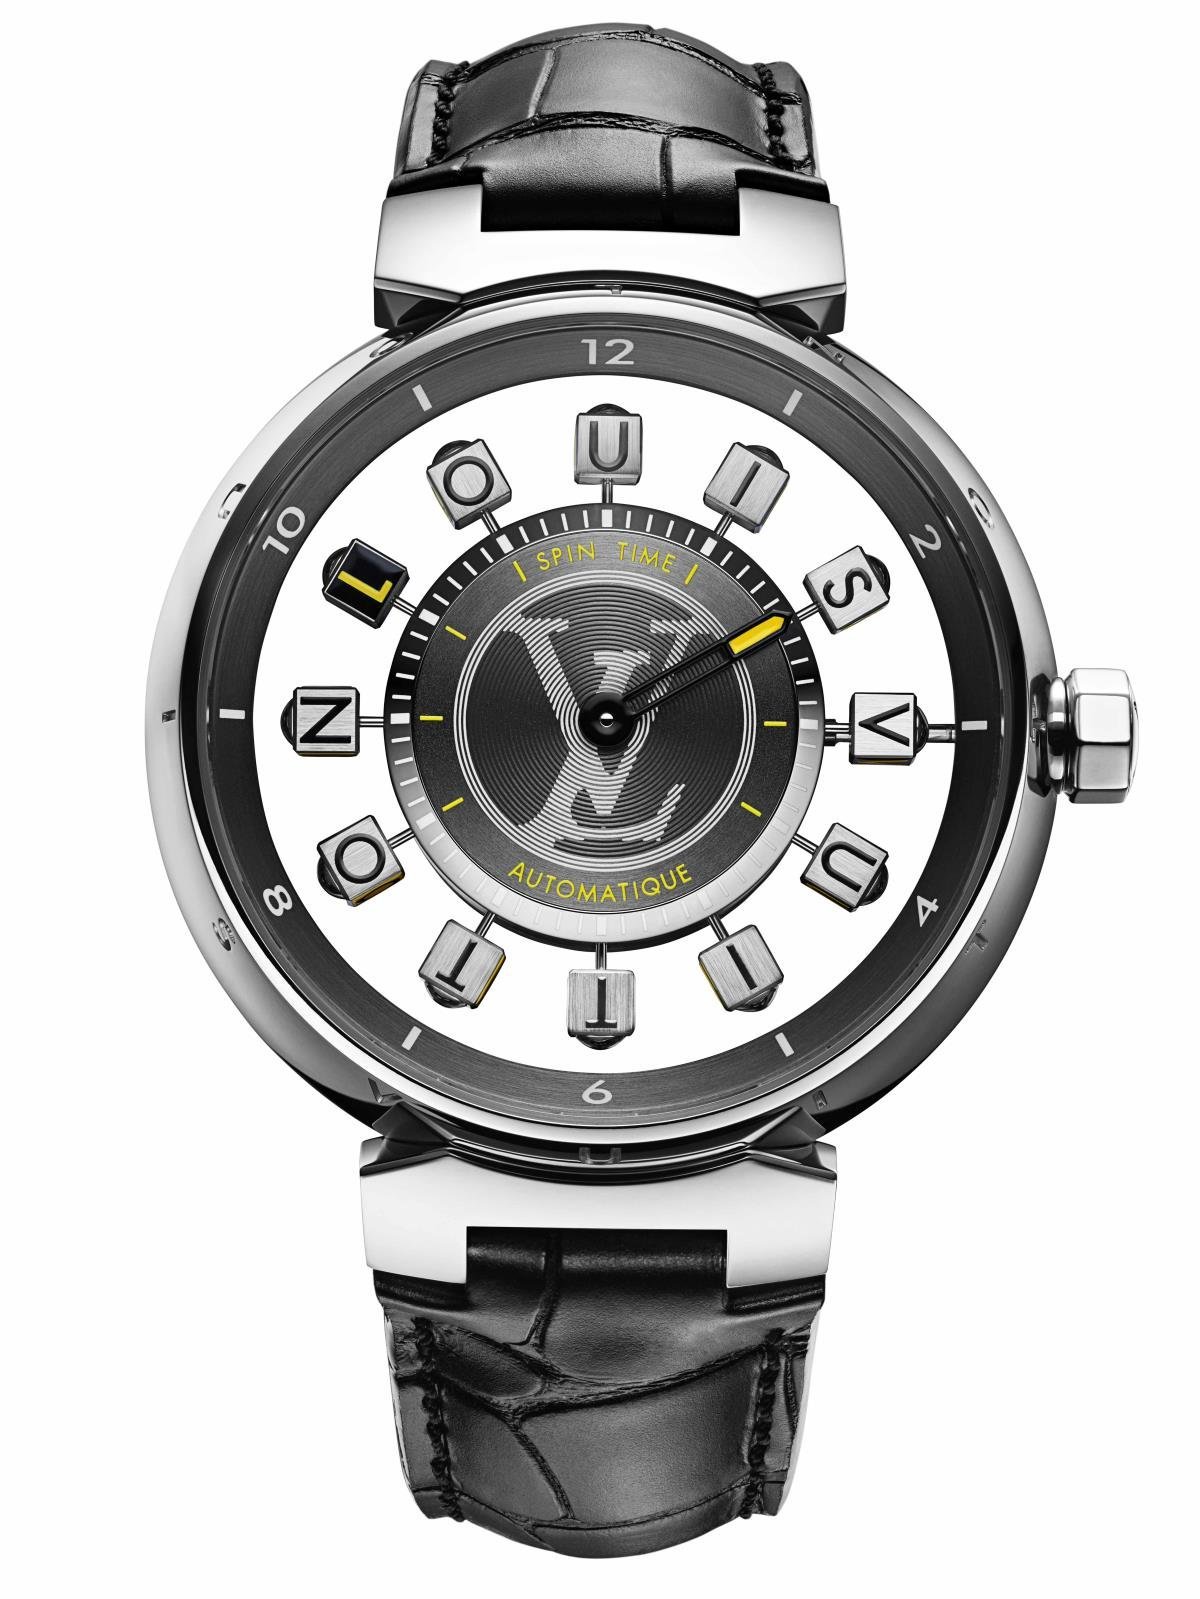 LOUIS VUITTON TAMBOUR SPIN TIME REGATTA WRIST WATCH WITH WHITE DIAL FOR MEN